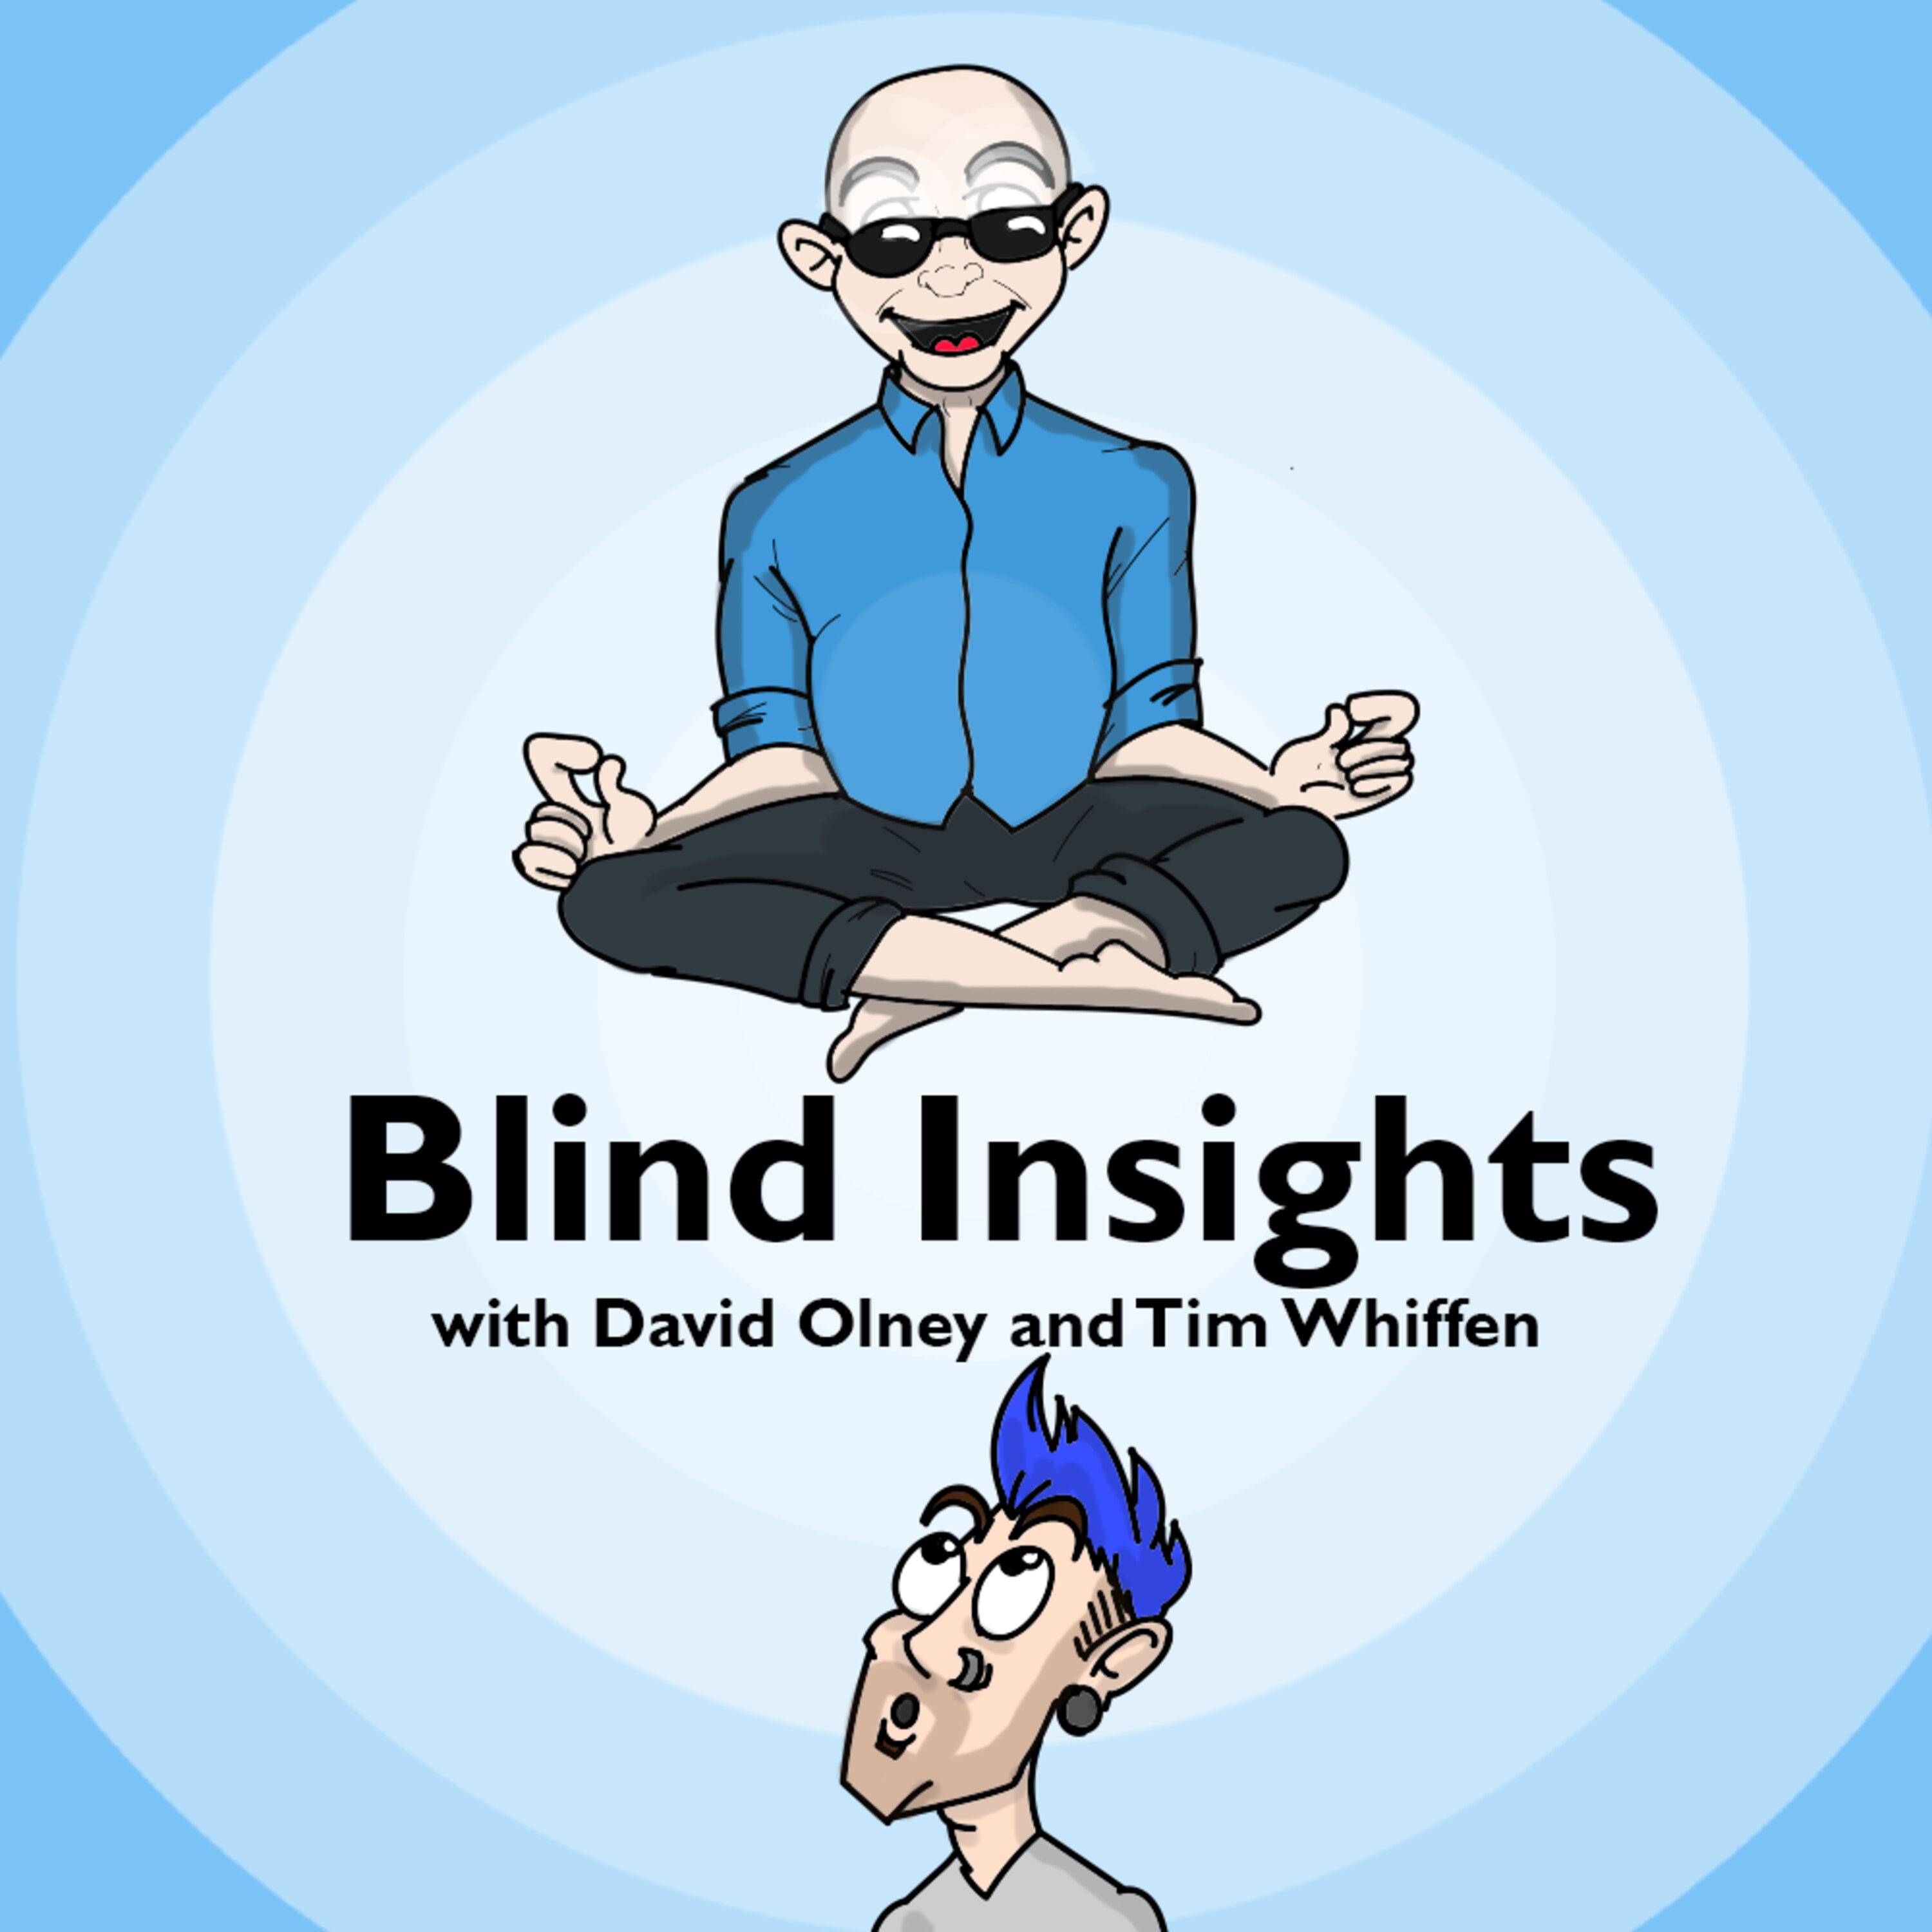 Blind Insights - It's the End of the World, but we can still Flourish (Special Guest Richard Heinberg)